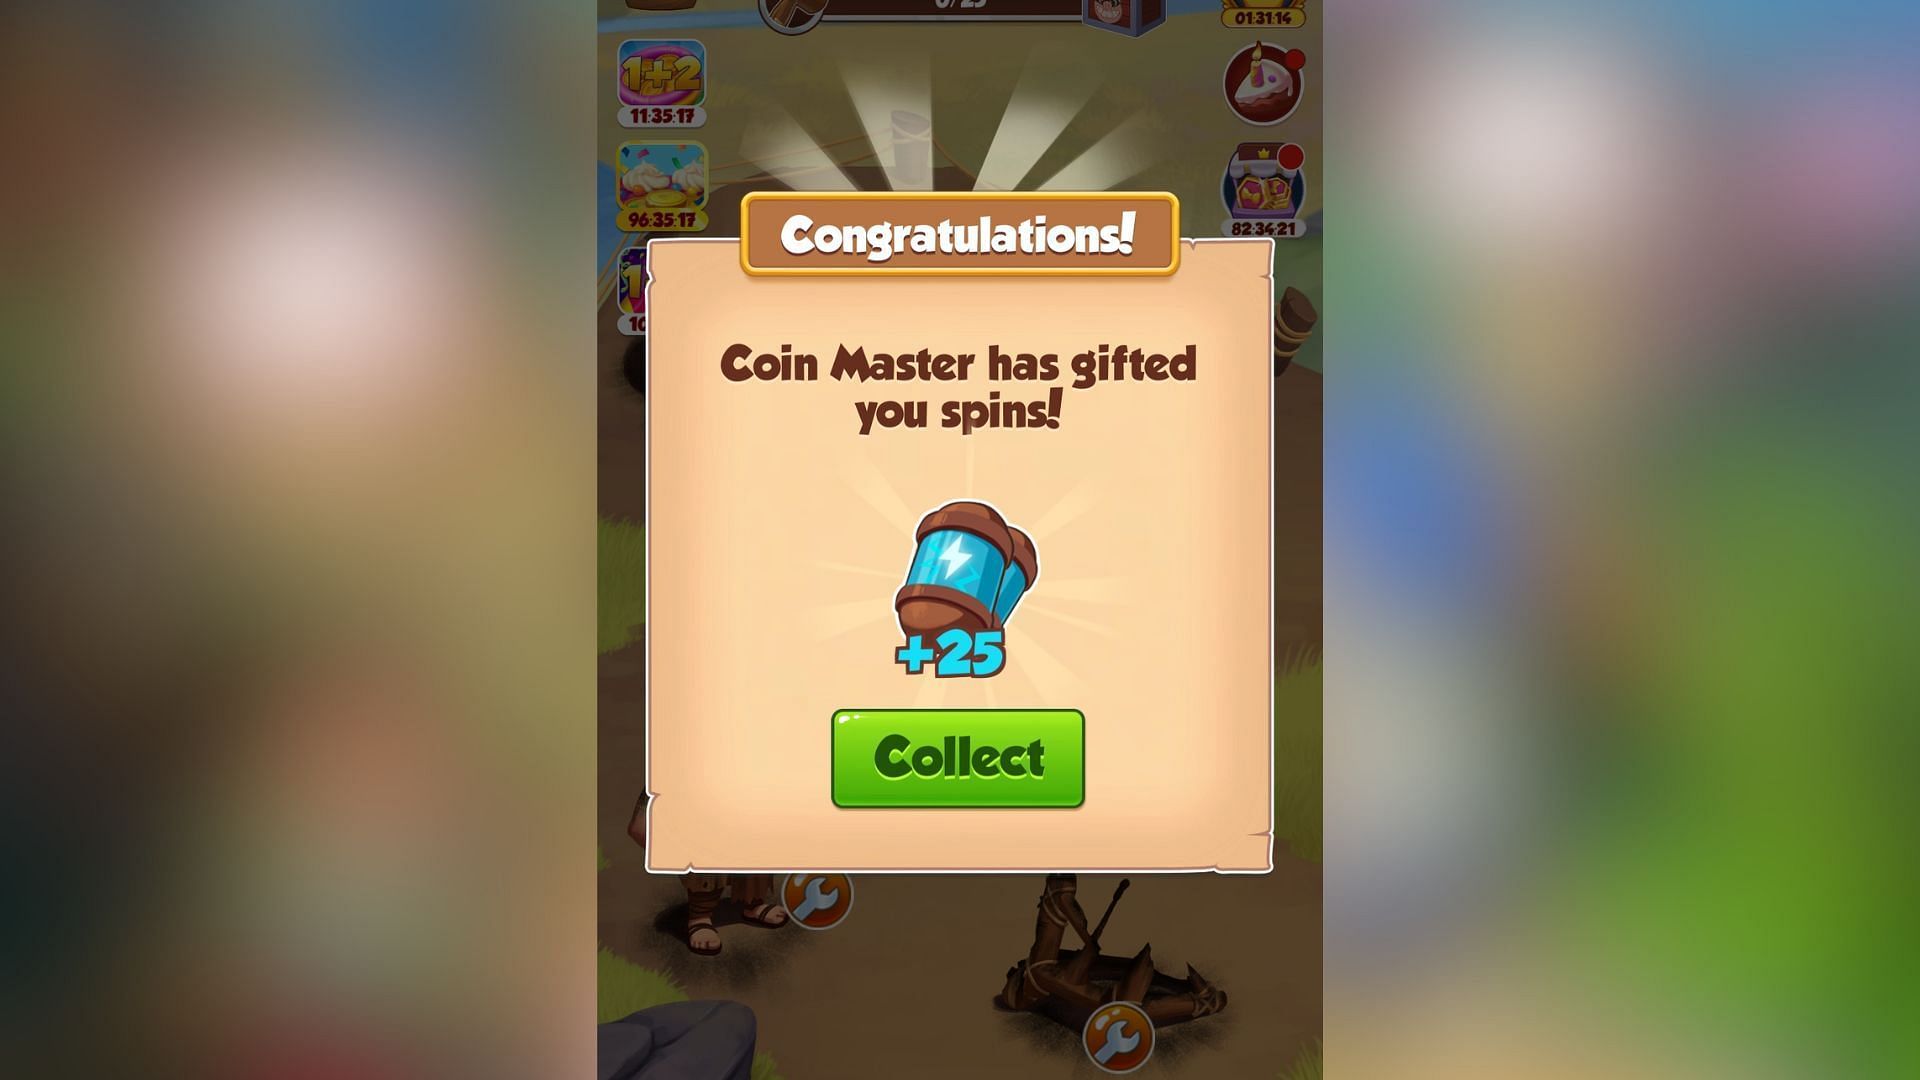 Tap the green Collect button to claim all Coin Master free Spins and coins (Image via Moon Active)